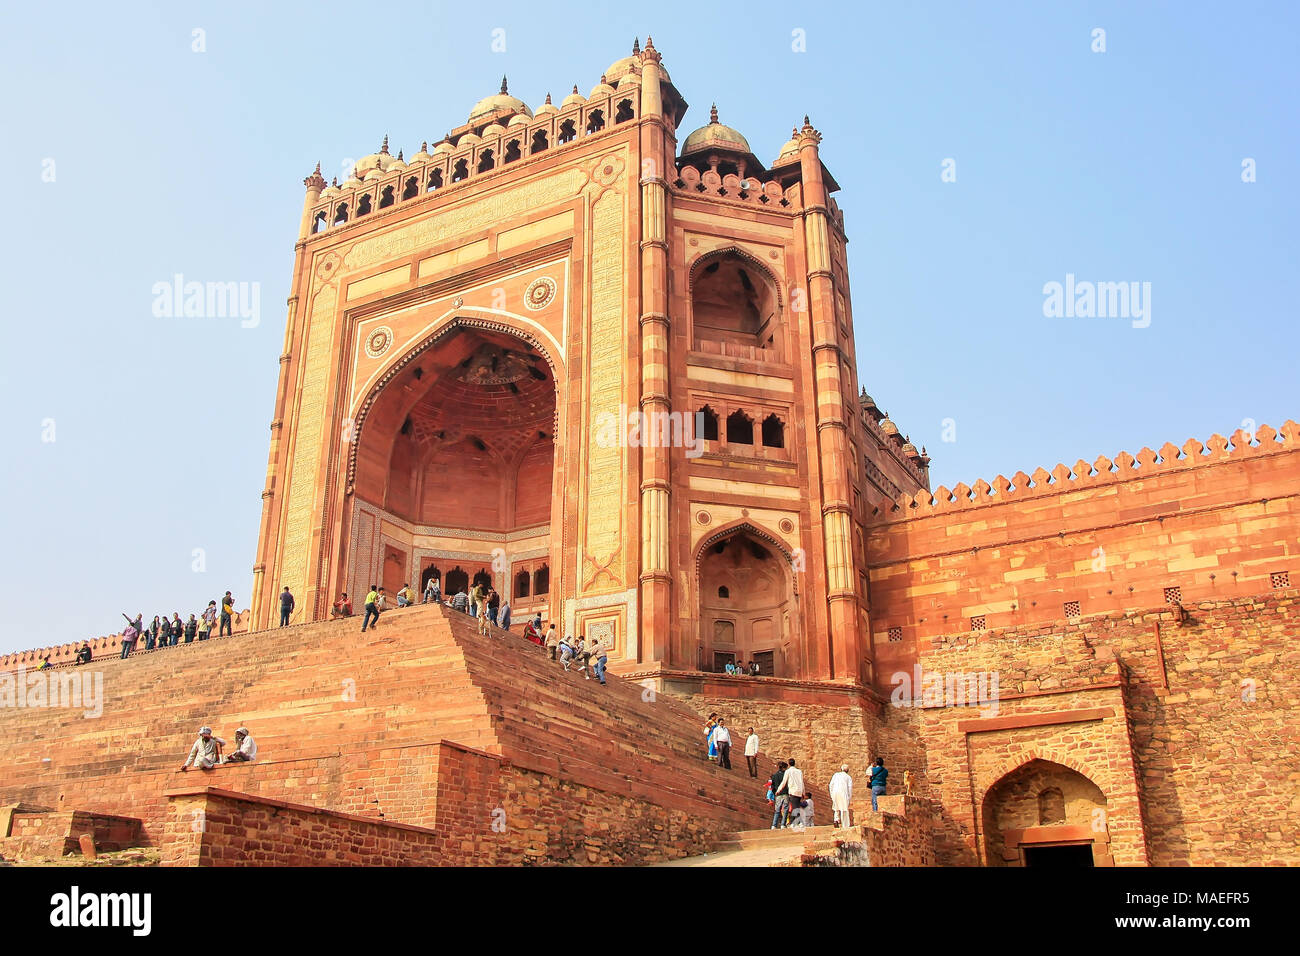 Buland Darwasa (Victory Gate) leading to Jama Masjid in Fatehpur Sikri, Uttar Pradesh, India. It is the highest gateway in the world and is an example Stock Photo